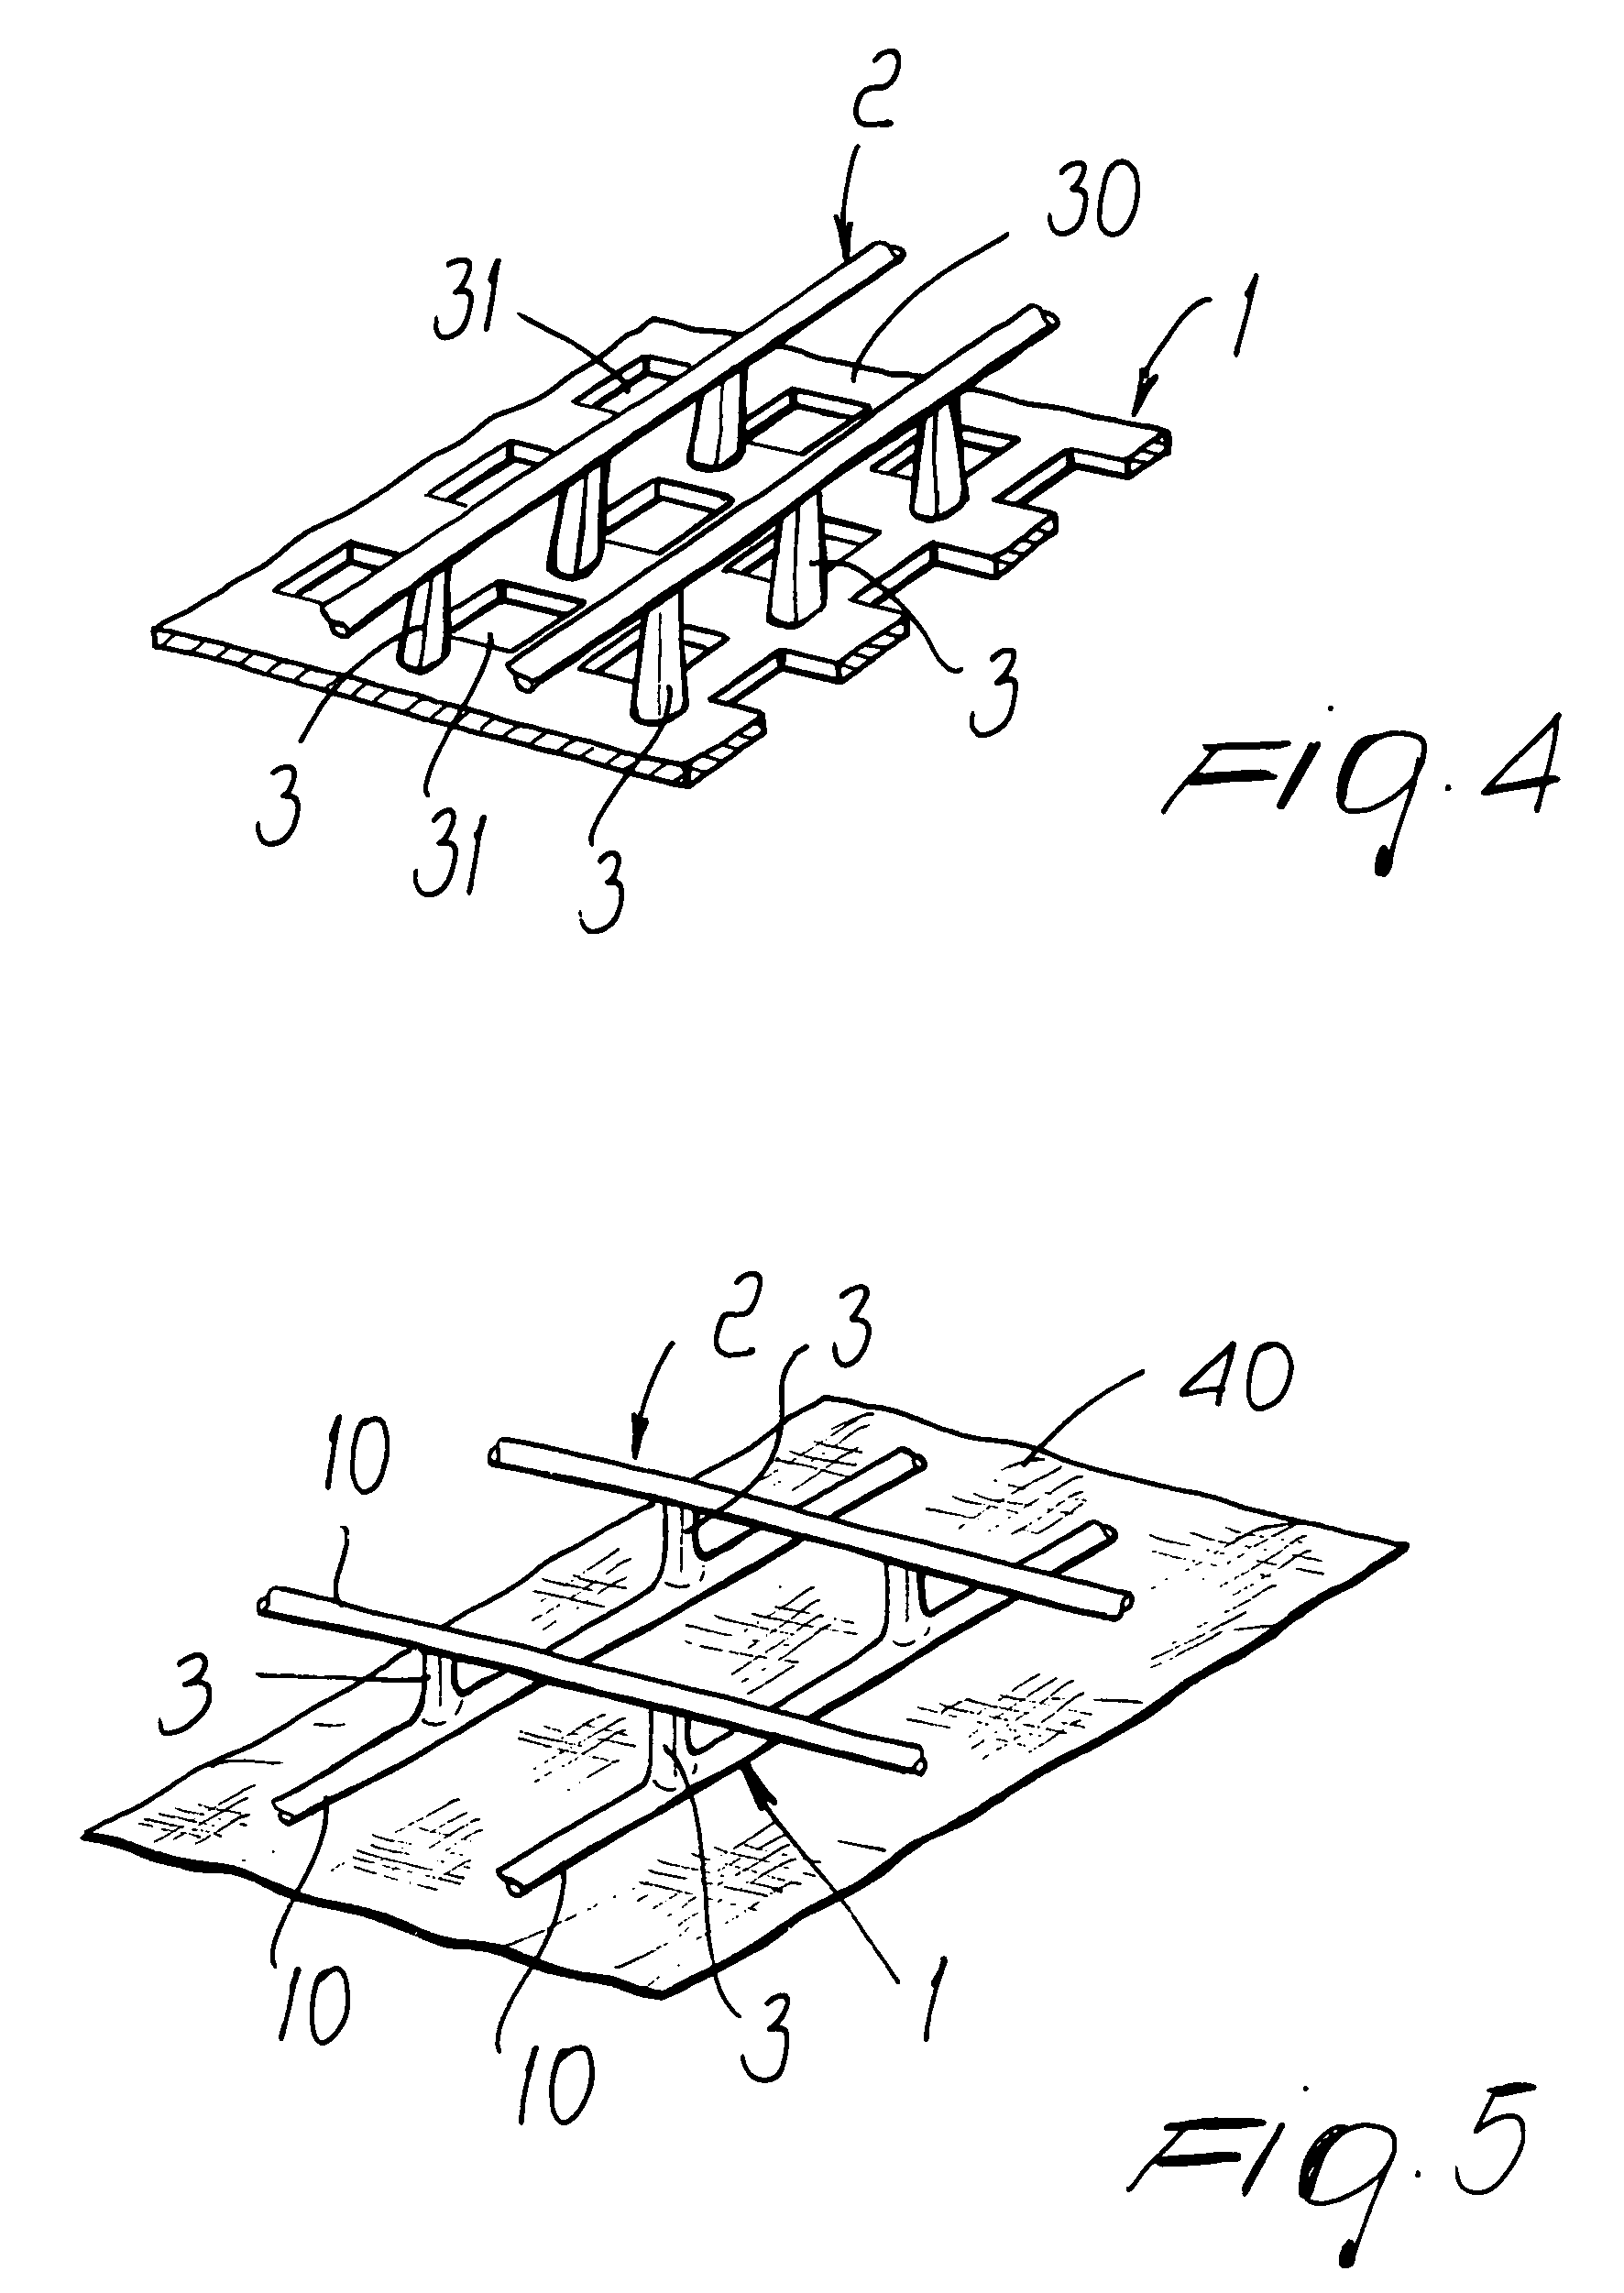 Net-like structure particularly for geotechnical uses